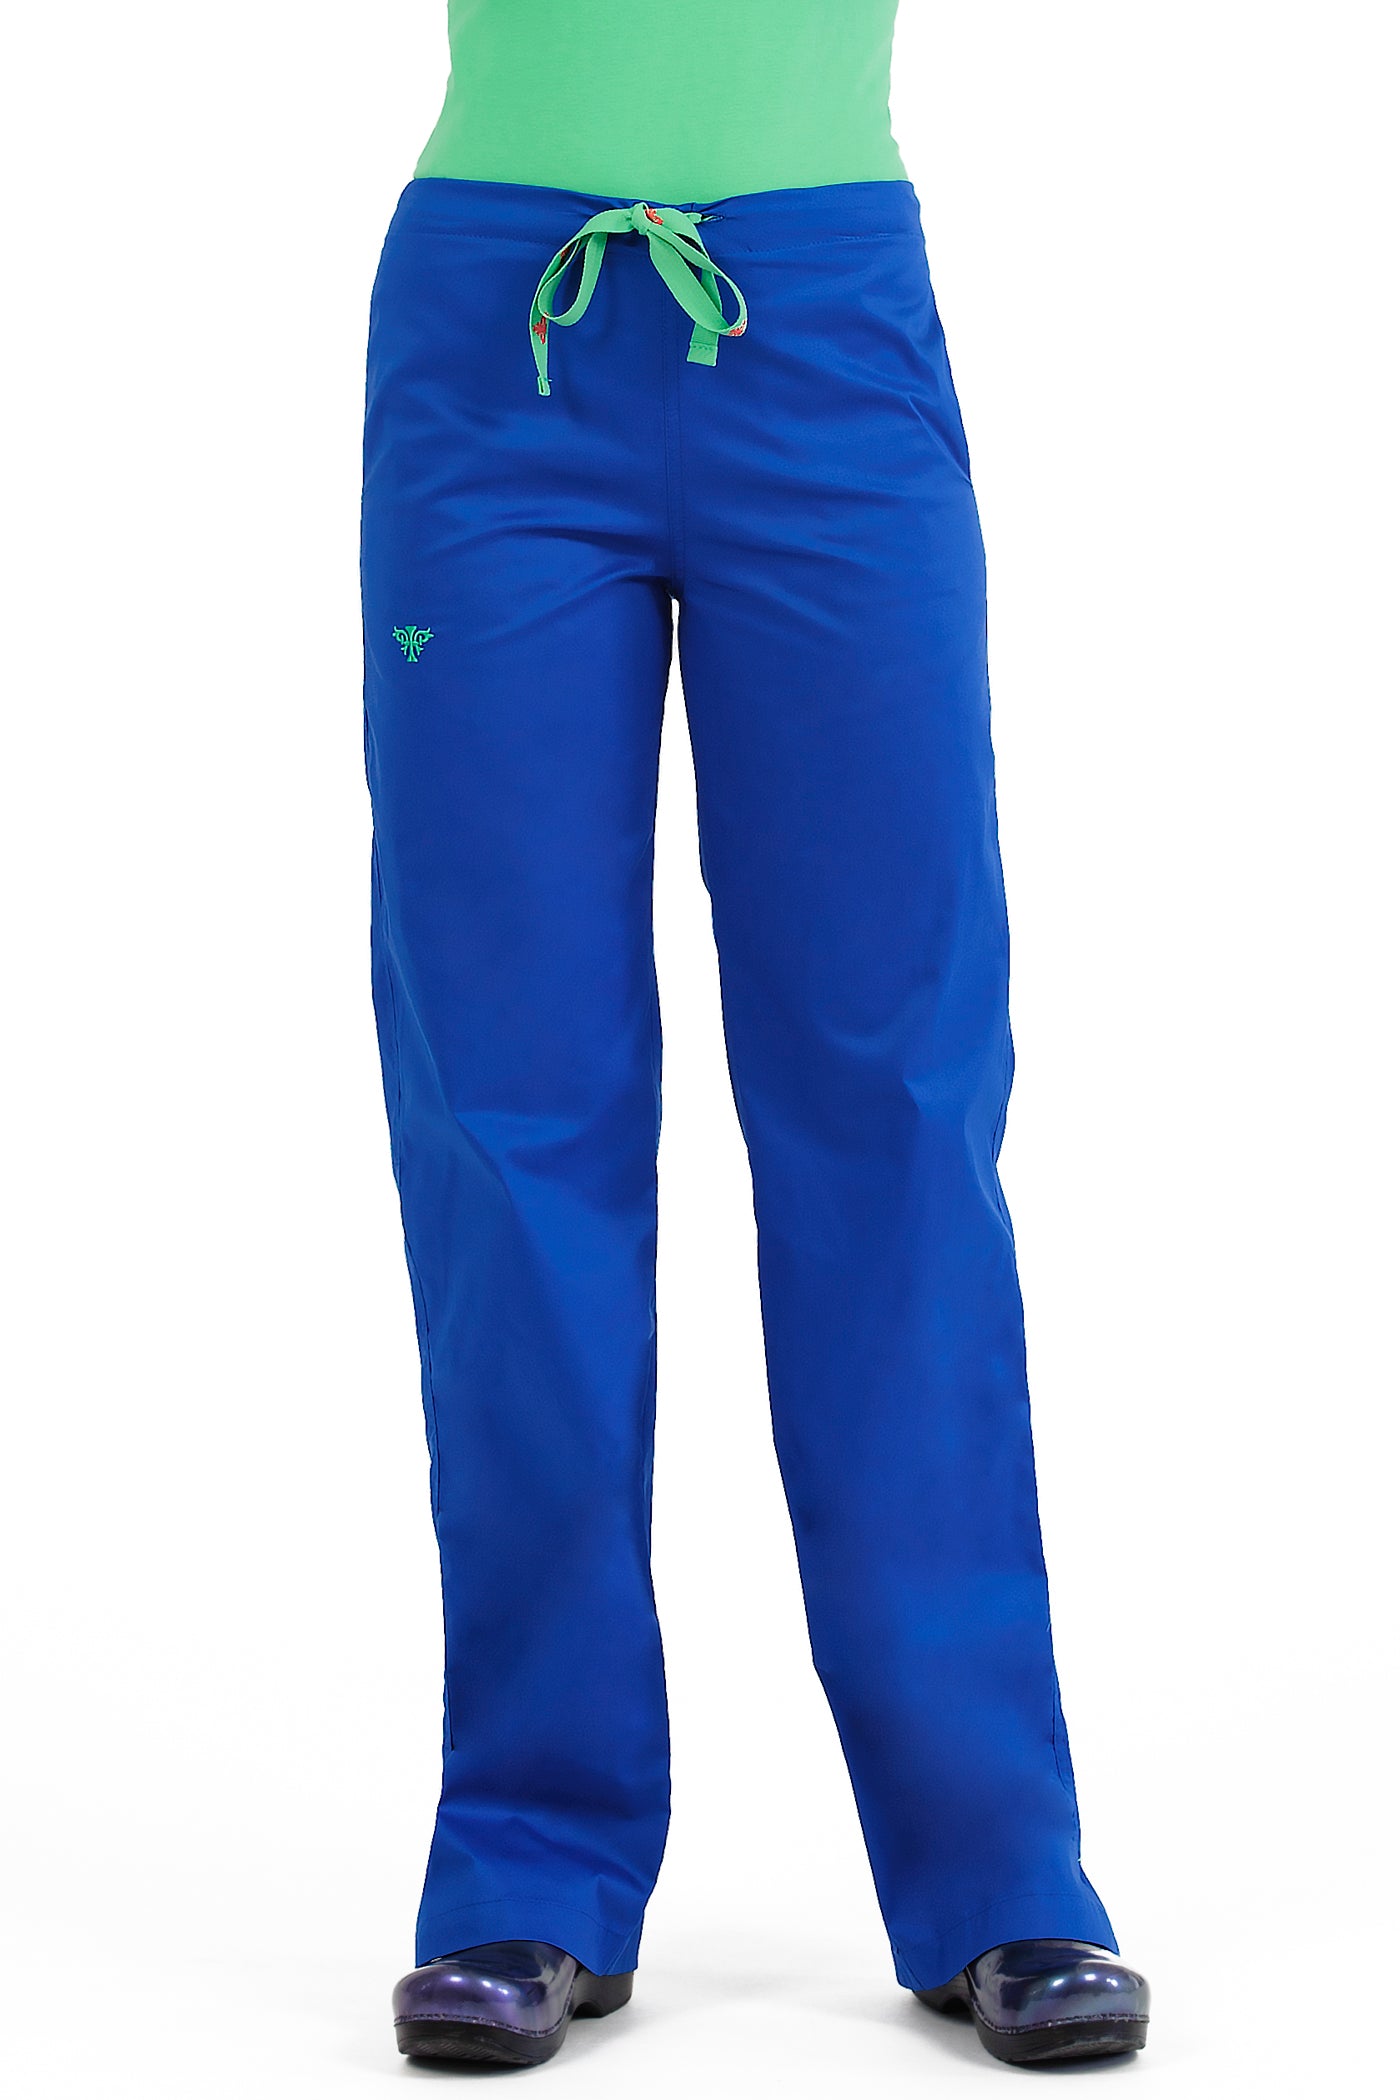 Med Couture Signature Drawstring Pant in Royal Keylime at Parker's Clothing and Shoes. Med Couture Sale Scrub Pants.